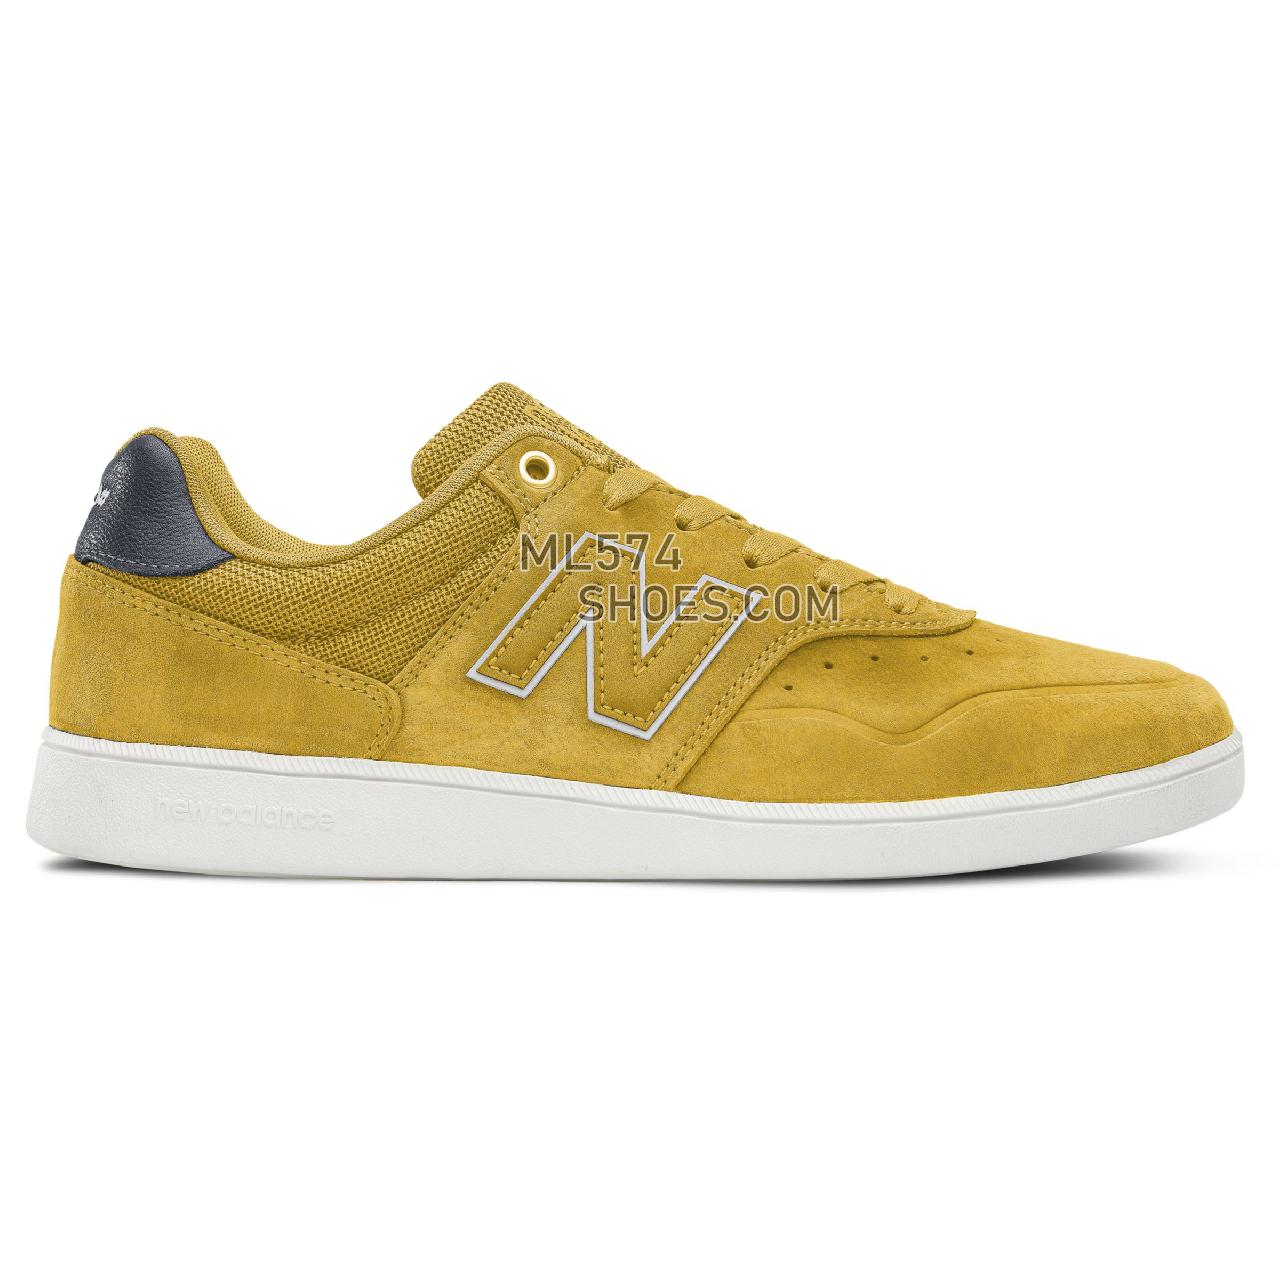 New Balance Numeric 288 - Men's NB Numeric Skate - Yellow with Navy - NM288PAP